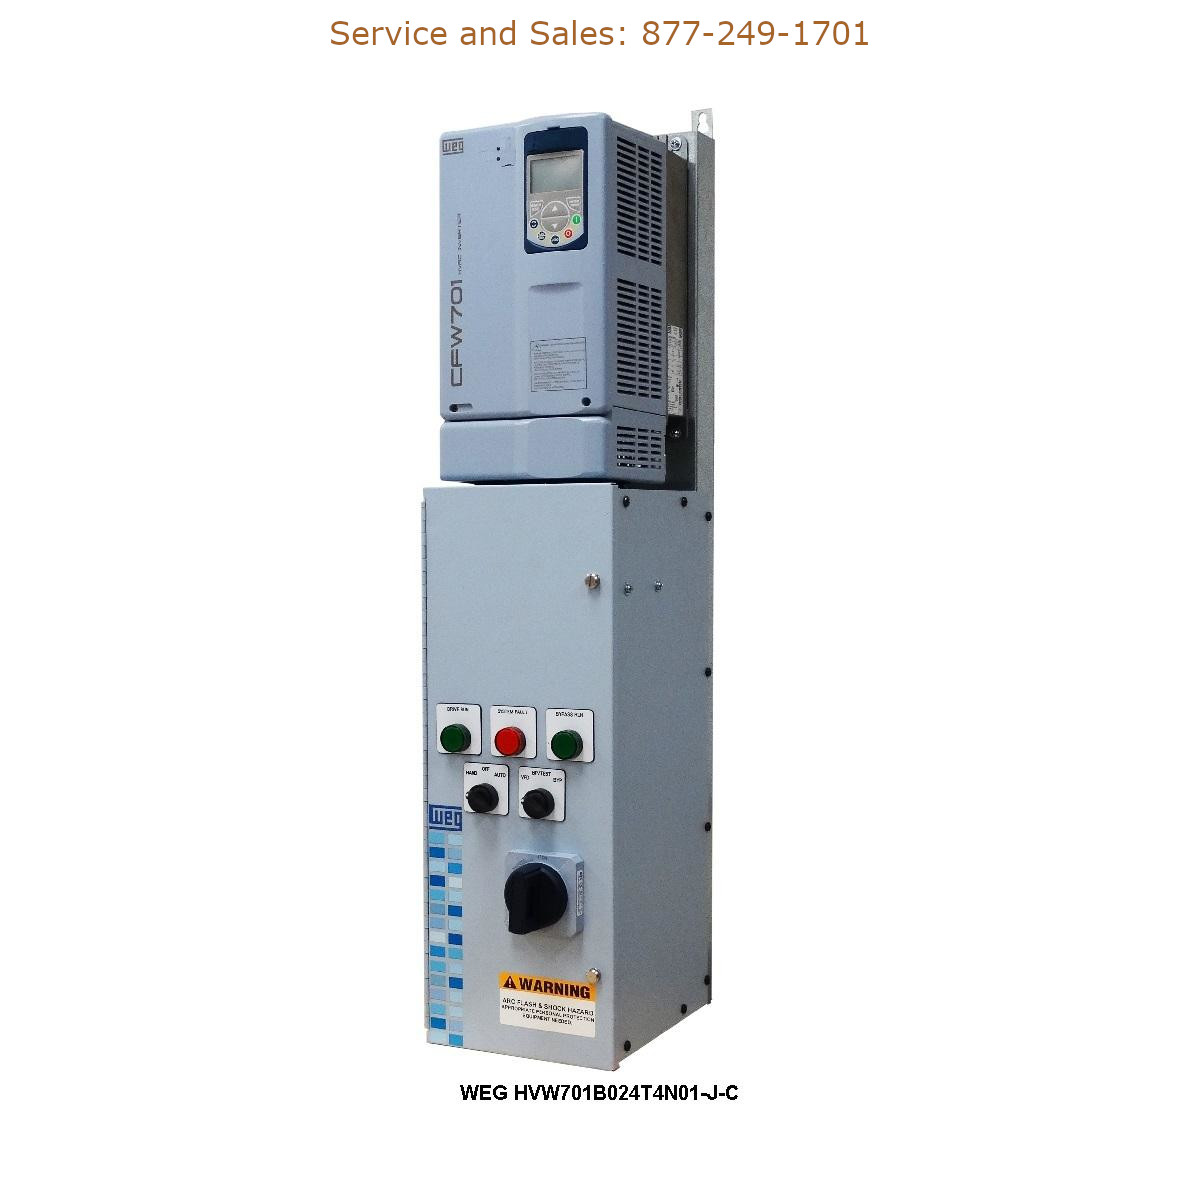 WEG HVW701B024T4N01-J-C WEG Model Number HVW701B024T4N01-J-C WEG Drives, Variable Speed Drives Repair Service, Troubleshooting, Replacement Parts https://gesrepair.com/wp-content/uploads/2022/WEG/WEG_HVW701B024T4N01-J-C_Drives_Variable_Speed_Drives.jpg